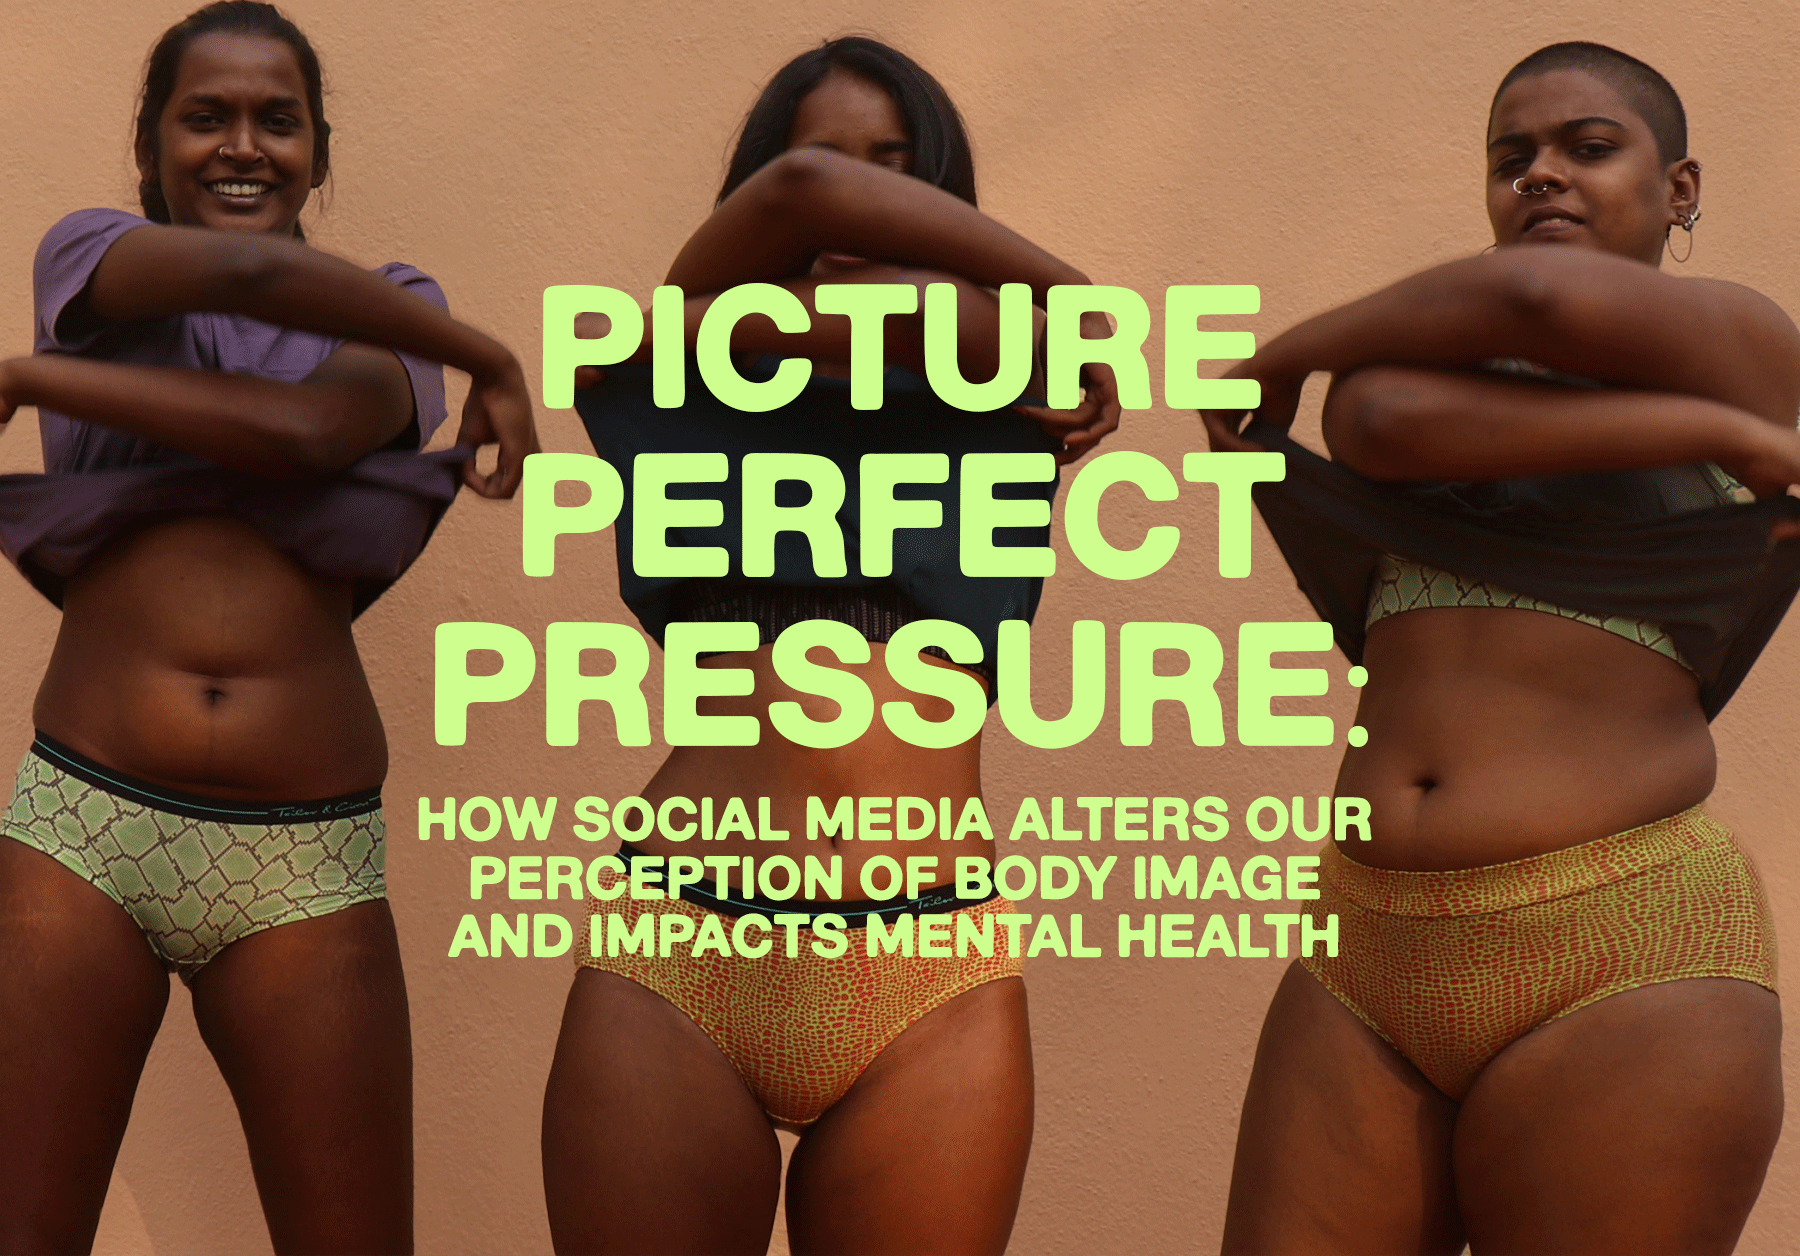 Picture Perfect Pressure: How Social Media Alters Our Perception of Body Image and Impacts Mental Health